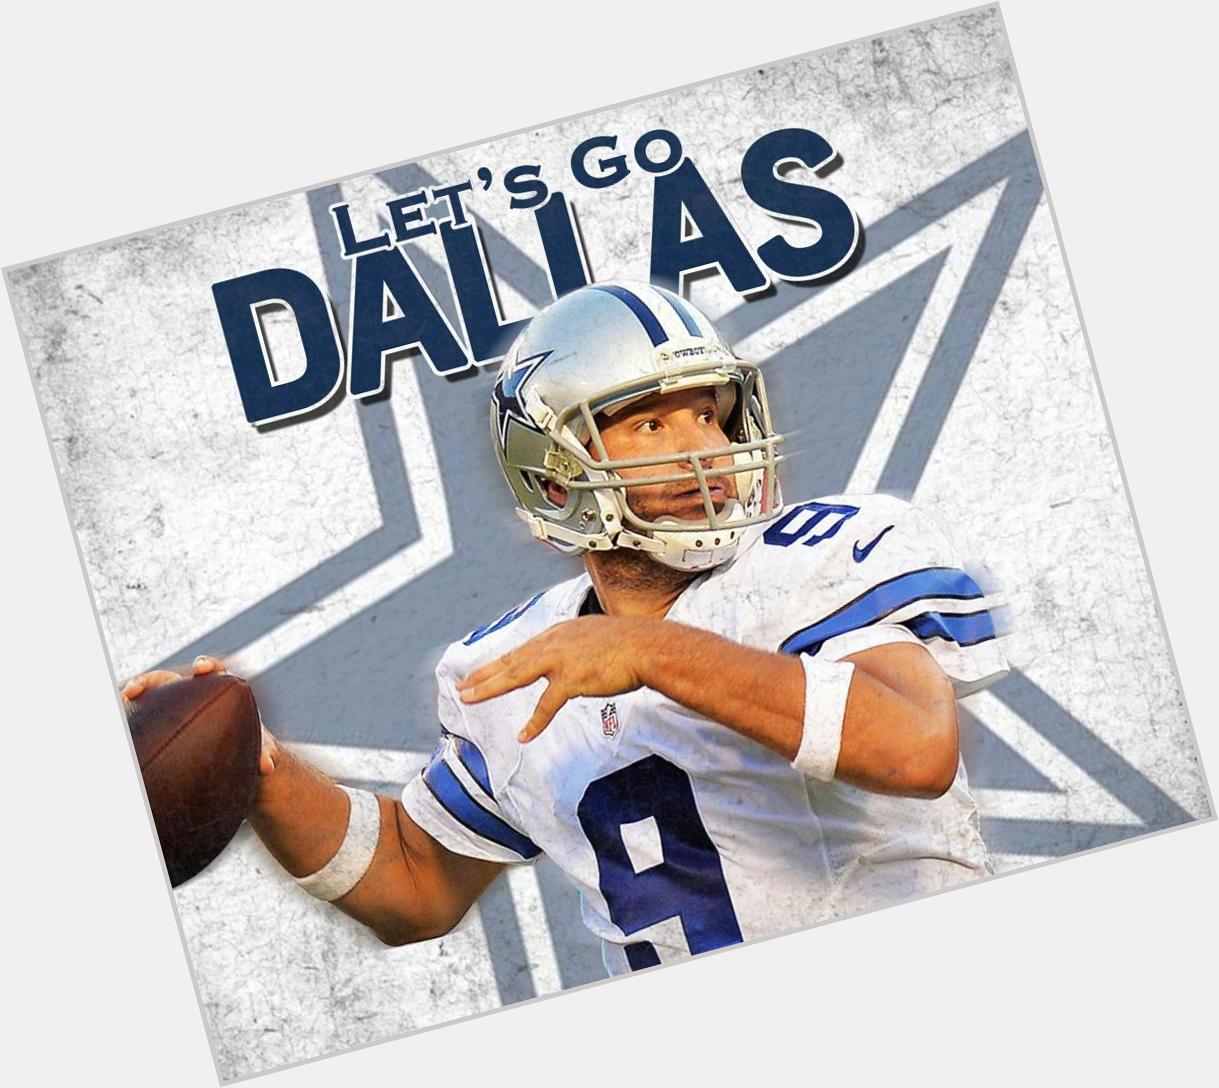 Happy Birthday to the man, Our QB, Tony Romo!!! This season is ours!!!      